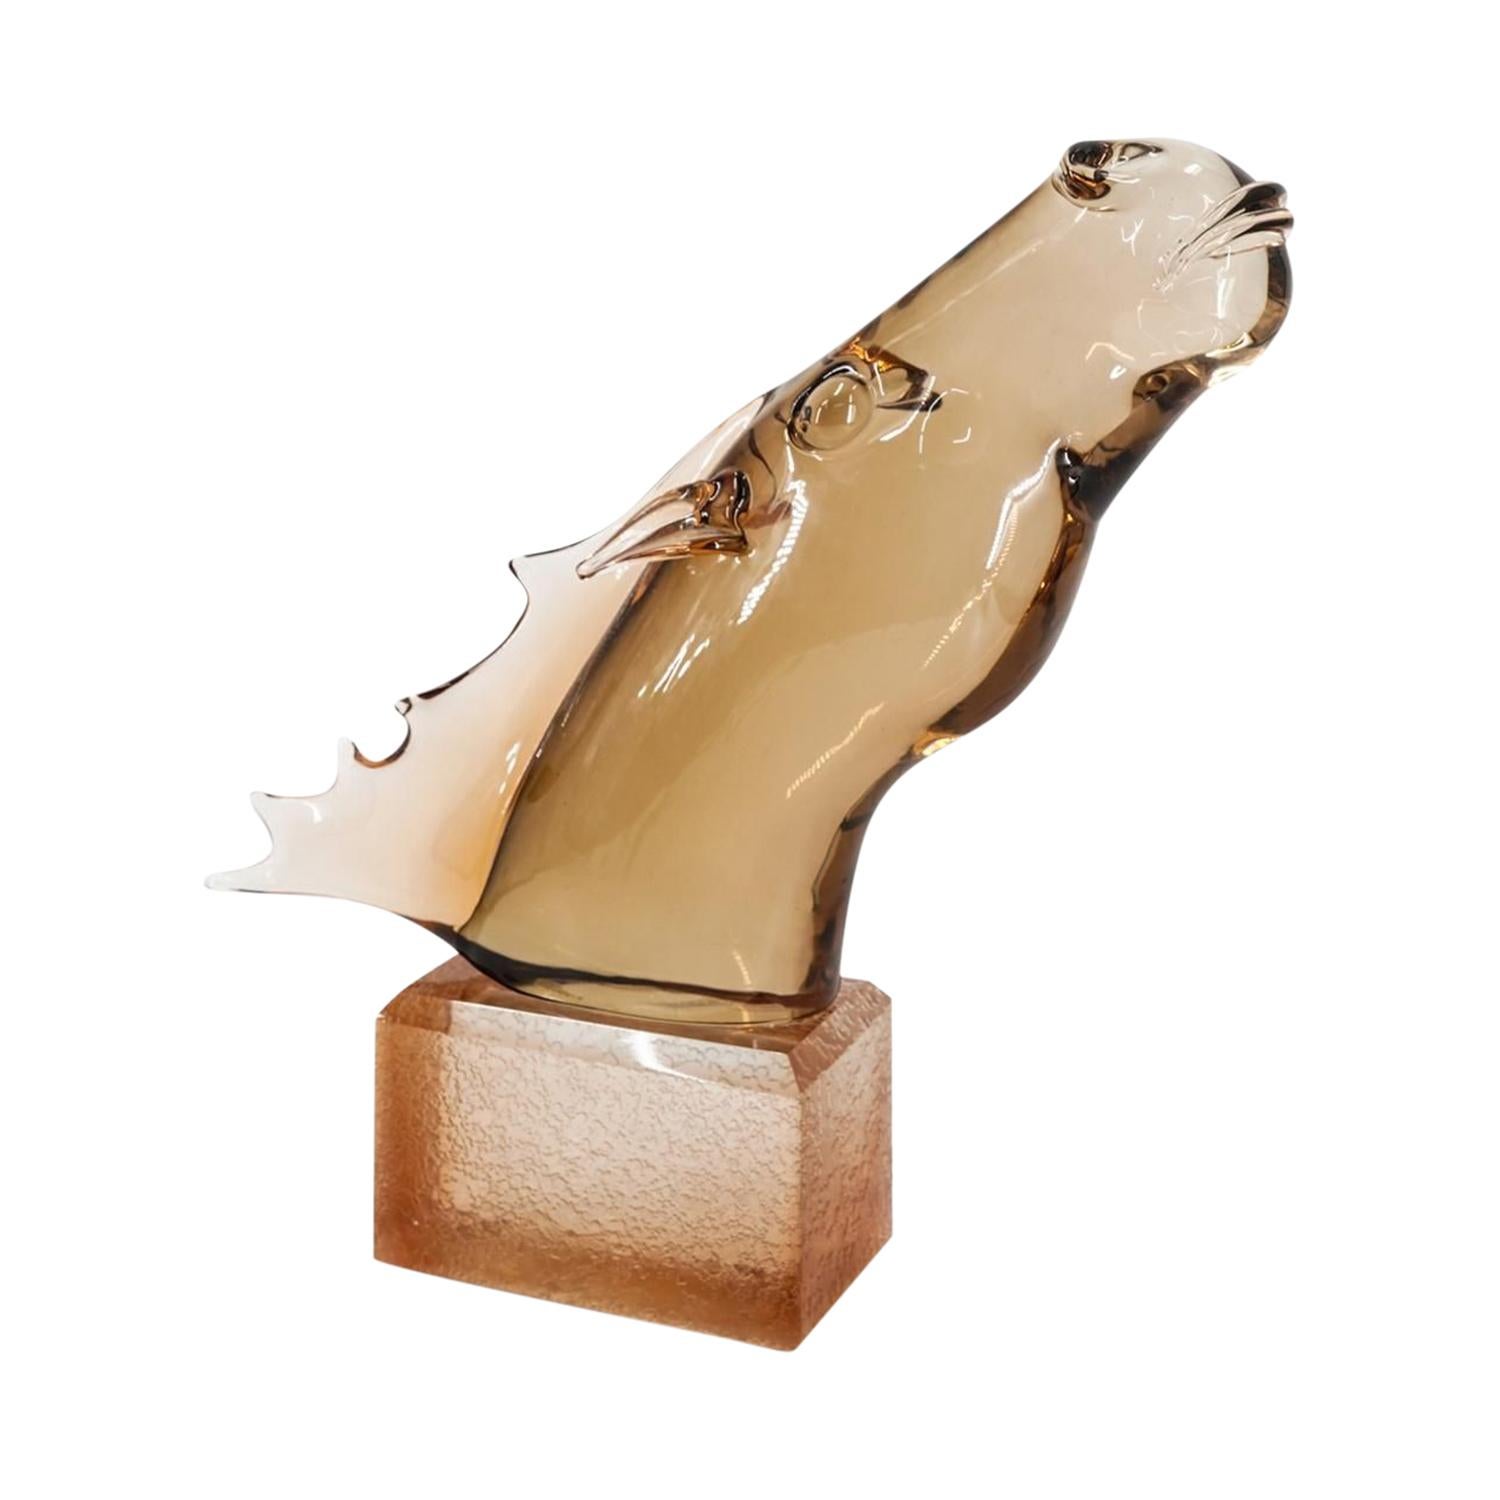 A gold-brown, vintage Mid-Century Modern Italian horse sculpture made of hand blown colored Murano glass, designed and produced by Pino Signoretto in good condition. The slightly smoked, arched décor piece is resting, sitting on a rectangular block